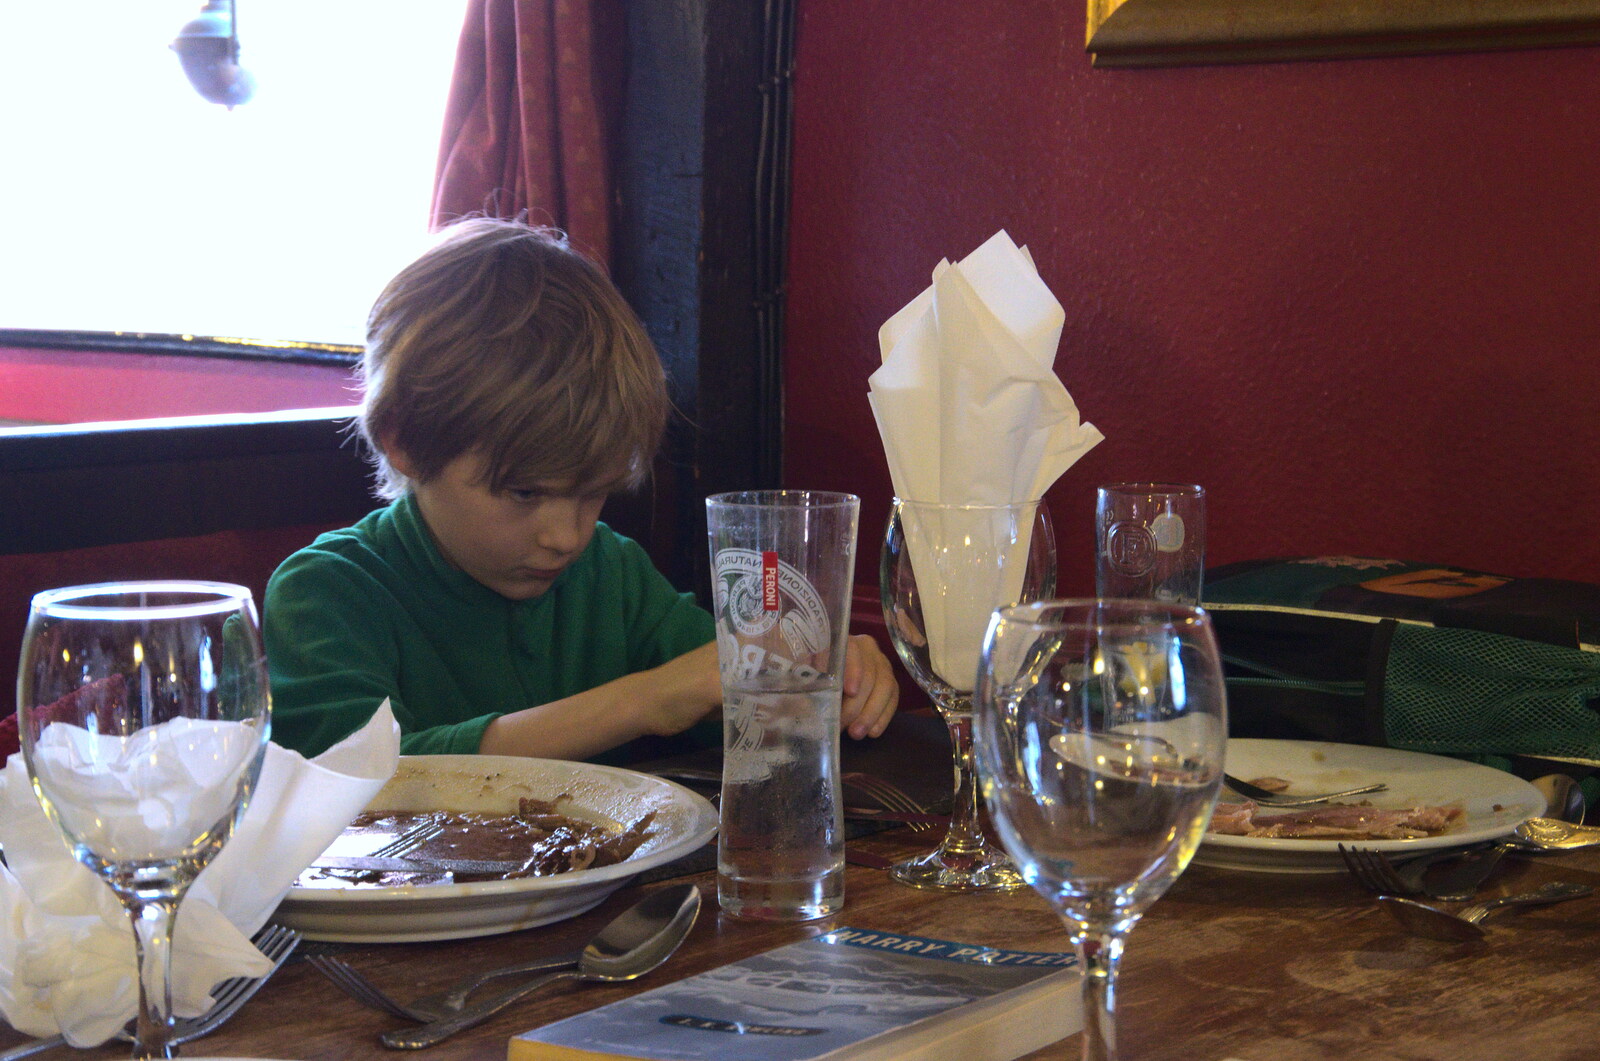 Harry concentrates on something from Sunday Lunch and a SwiftKey Trip to Nando's, Thornham and Bayswater - 22nd February 2020